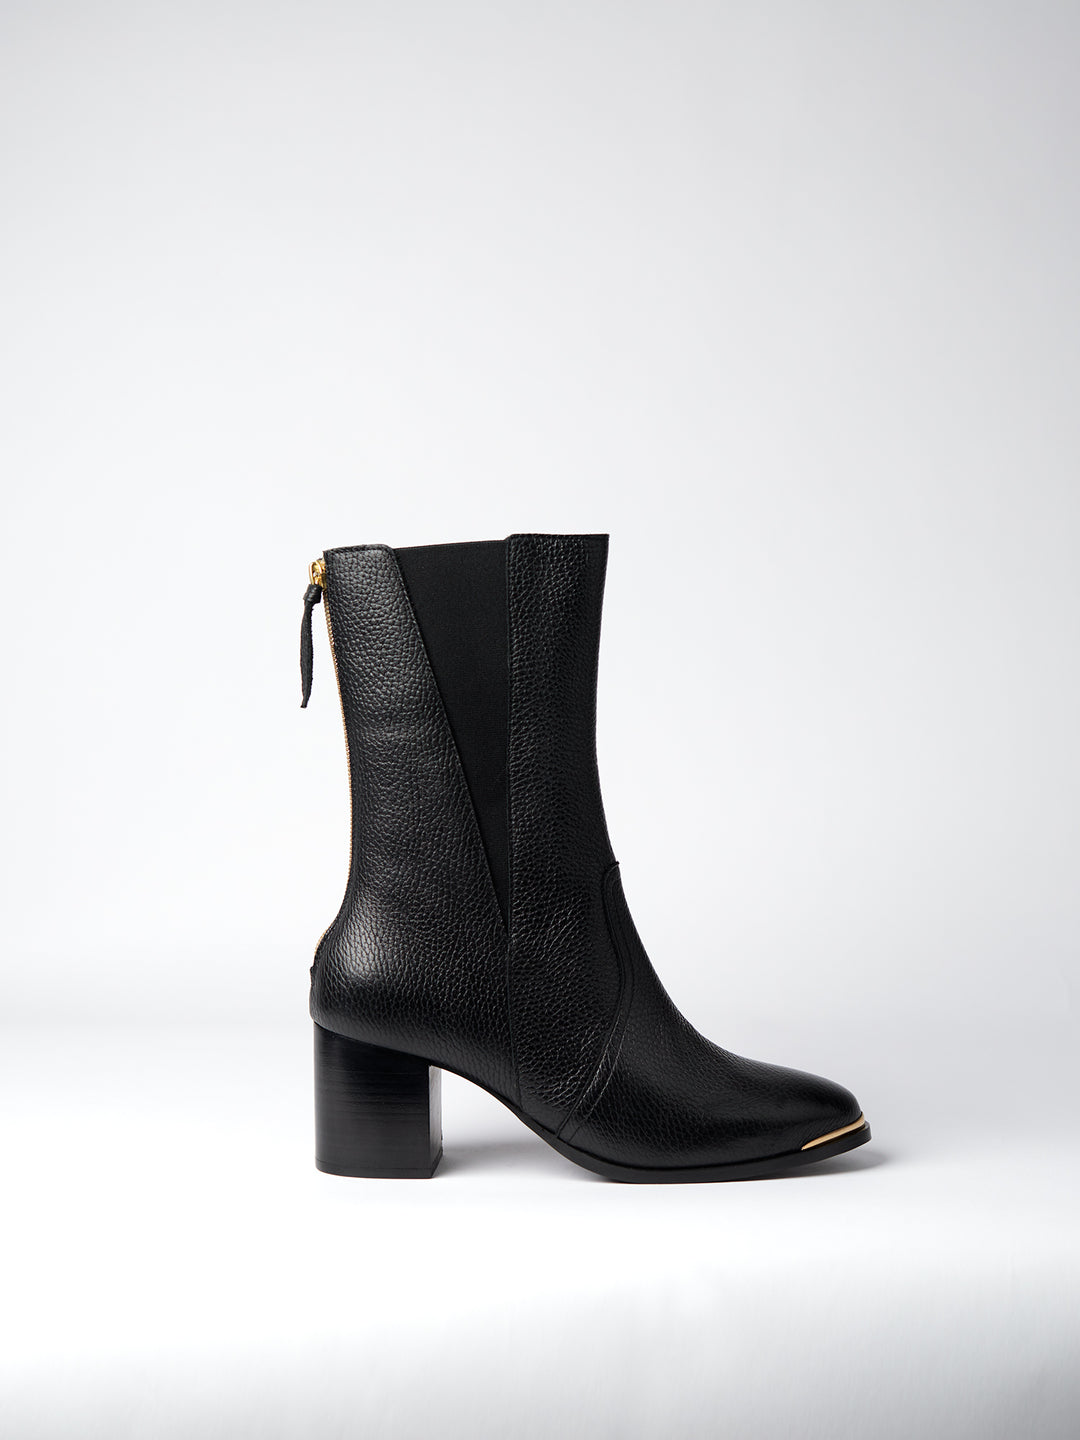 Blankens The Diana black heeled boot with gold detail in the front and zipper in the back